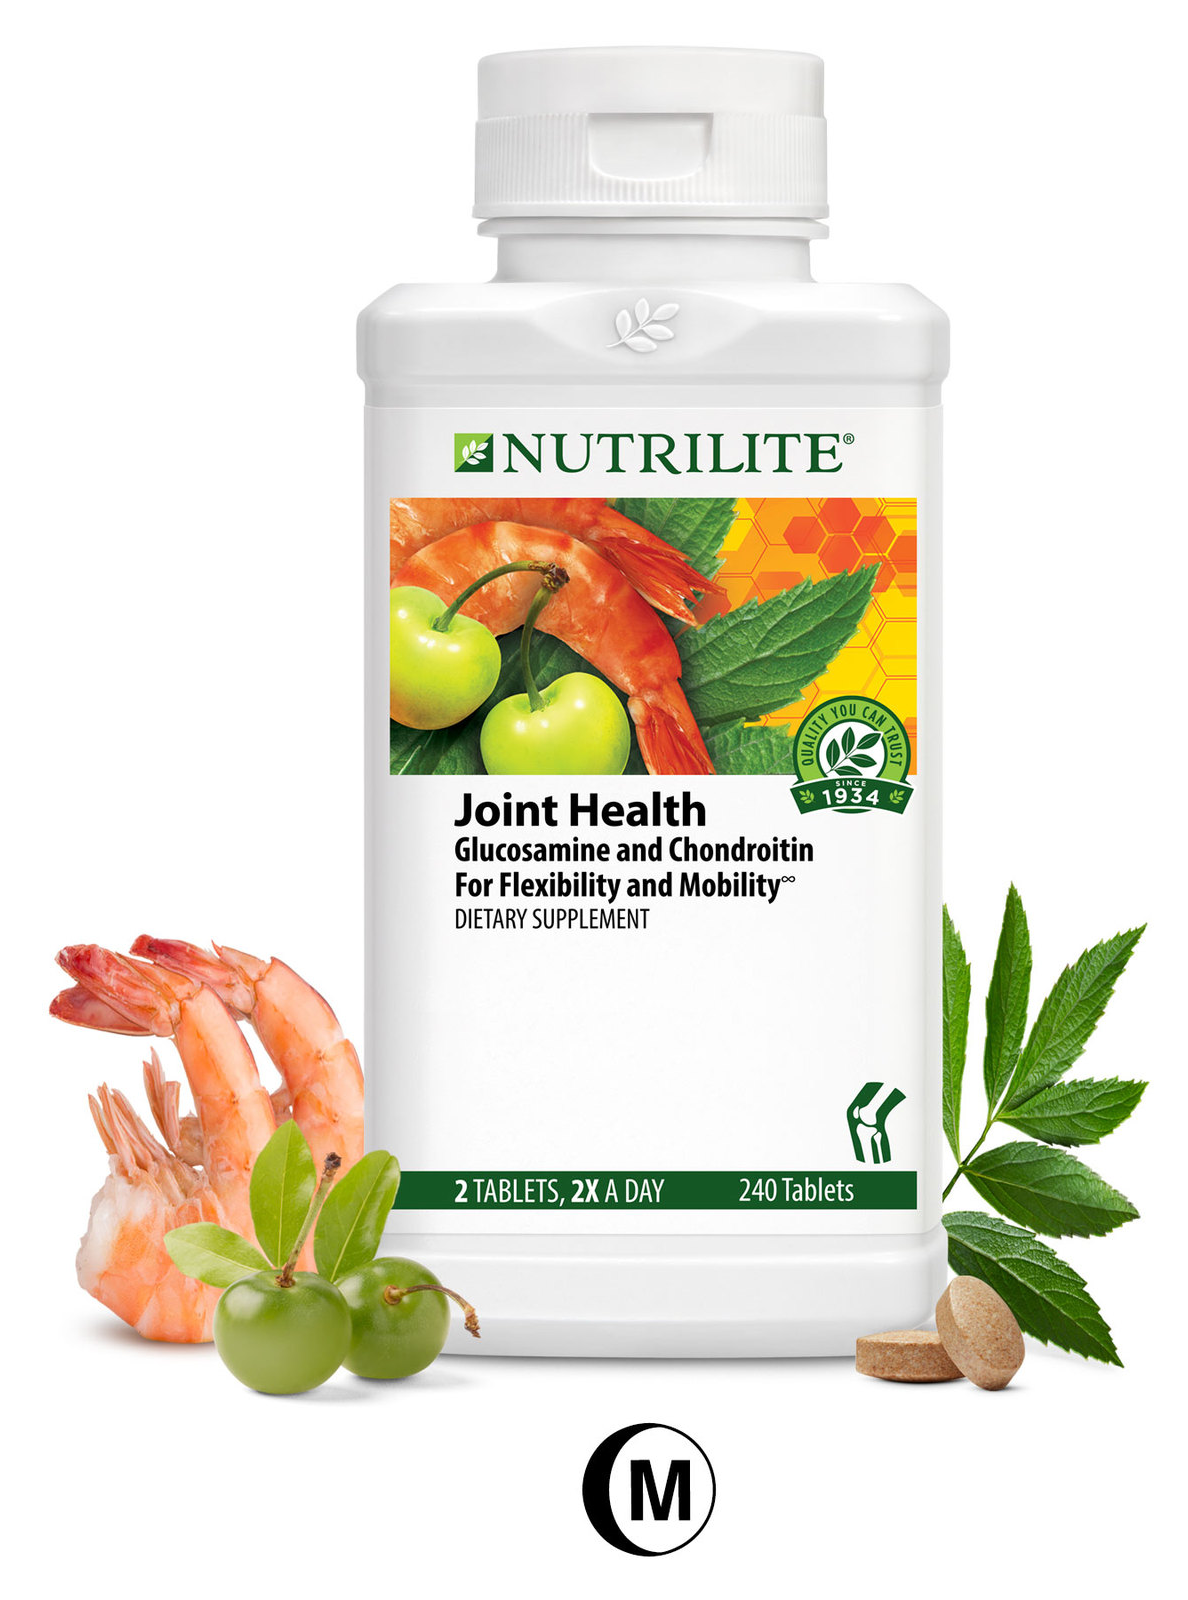 Nutrilite™ Joint Health - 60 Day Supply (240 tablets) - $80.00